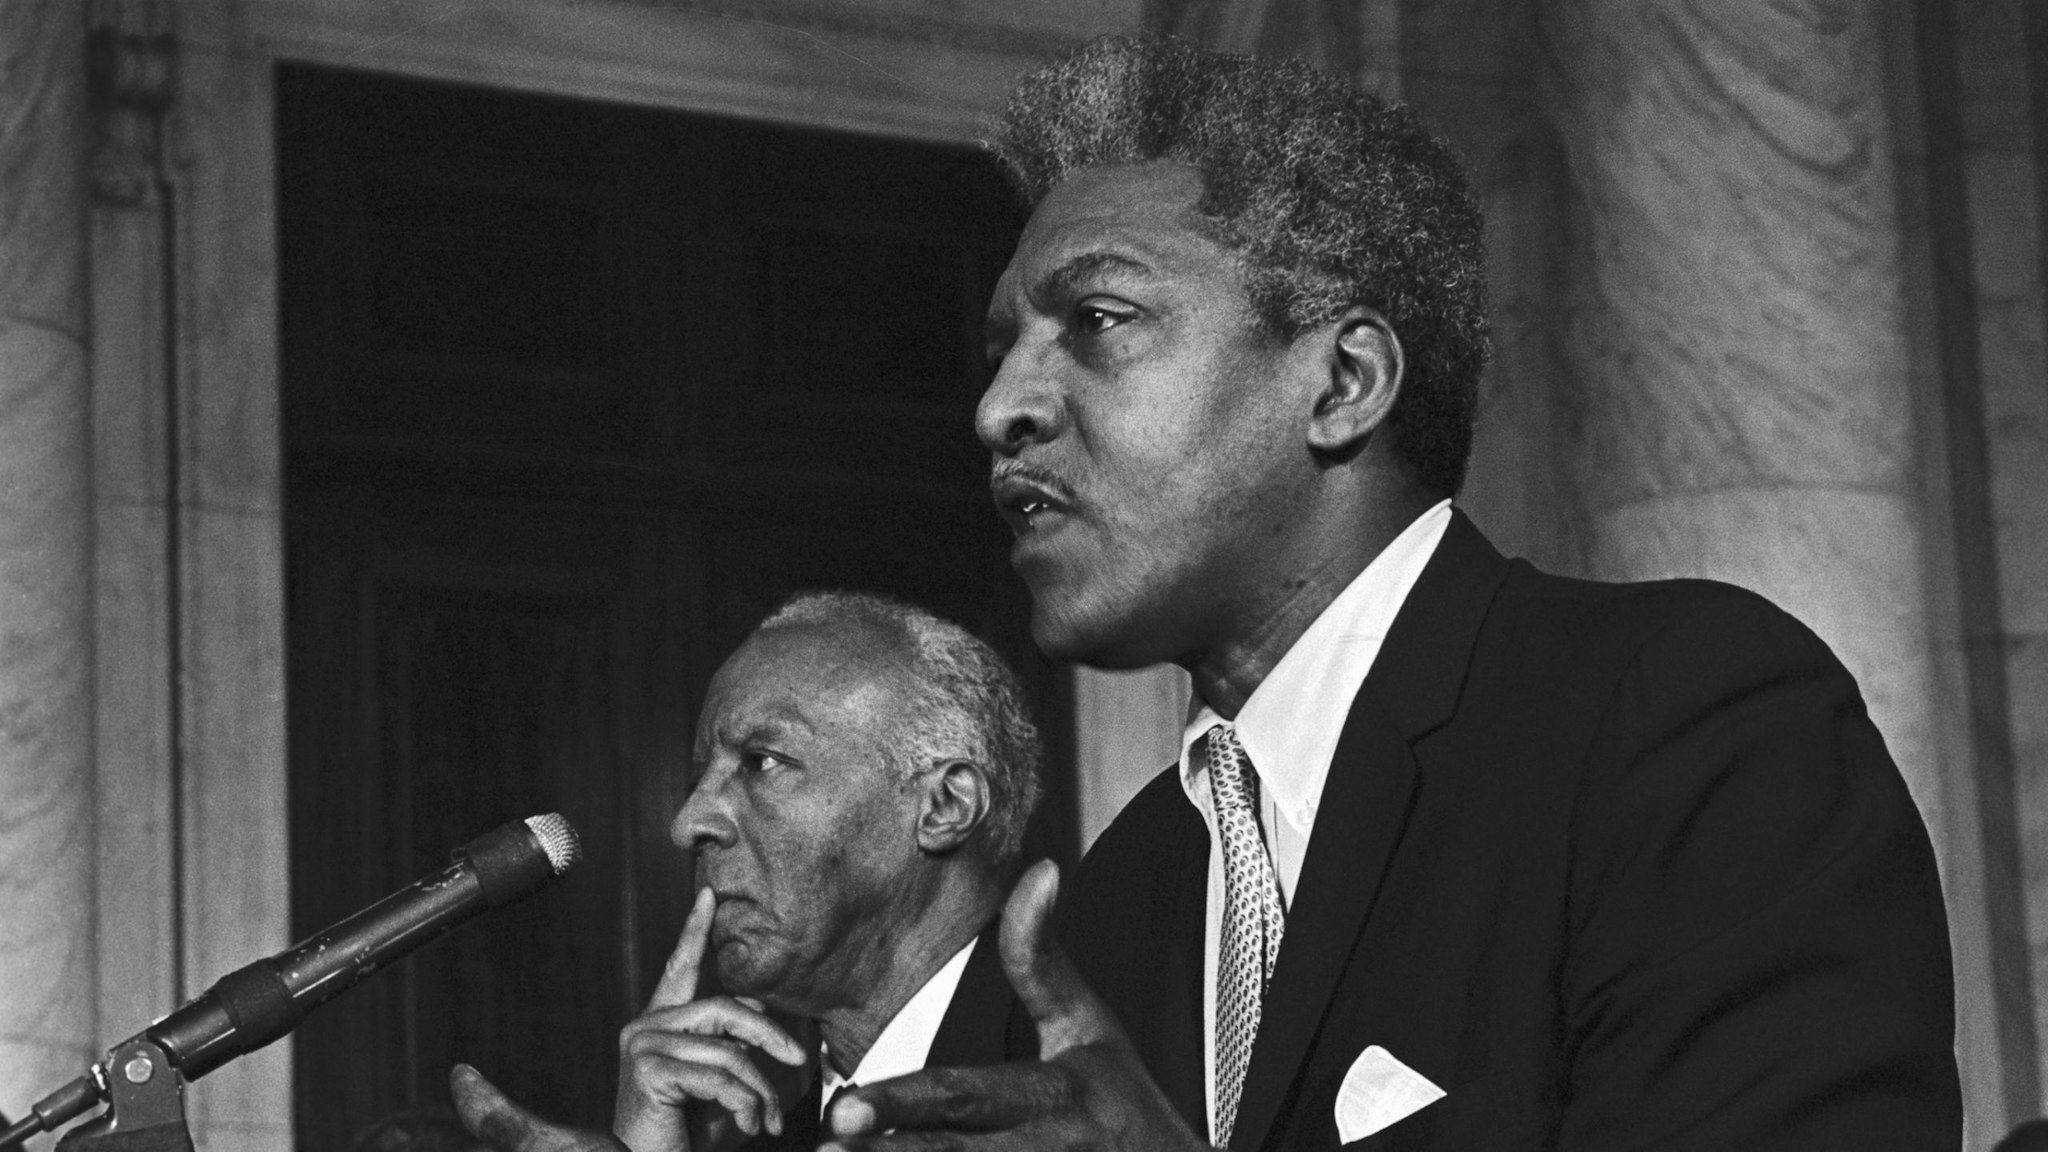 Bayard Rustin, Executive Director of the A. Phillip Randolph Institute, urged action on the "freedom budget' developed by the Institute which would guarantee an Annual wage for poor people.